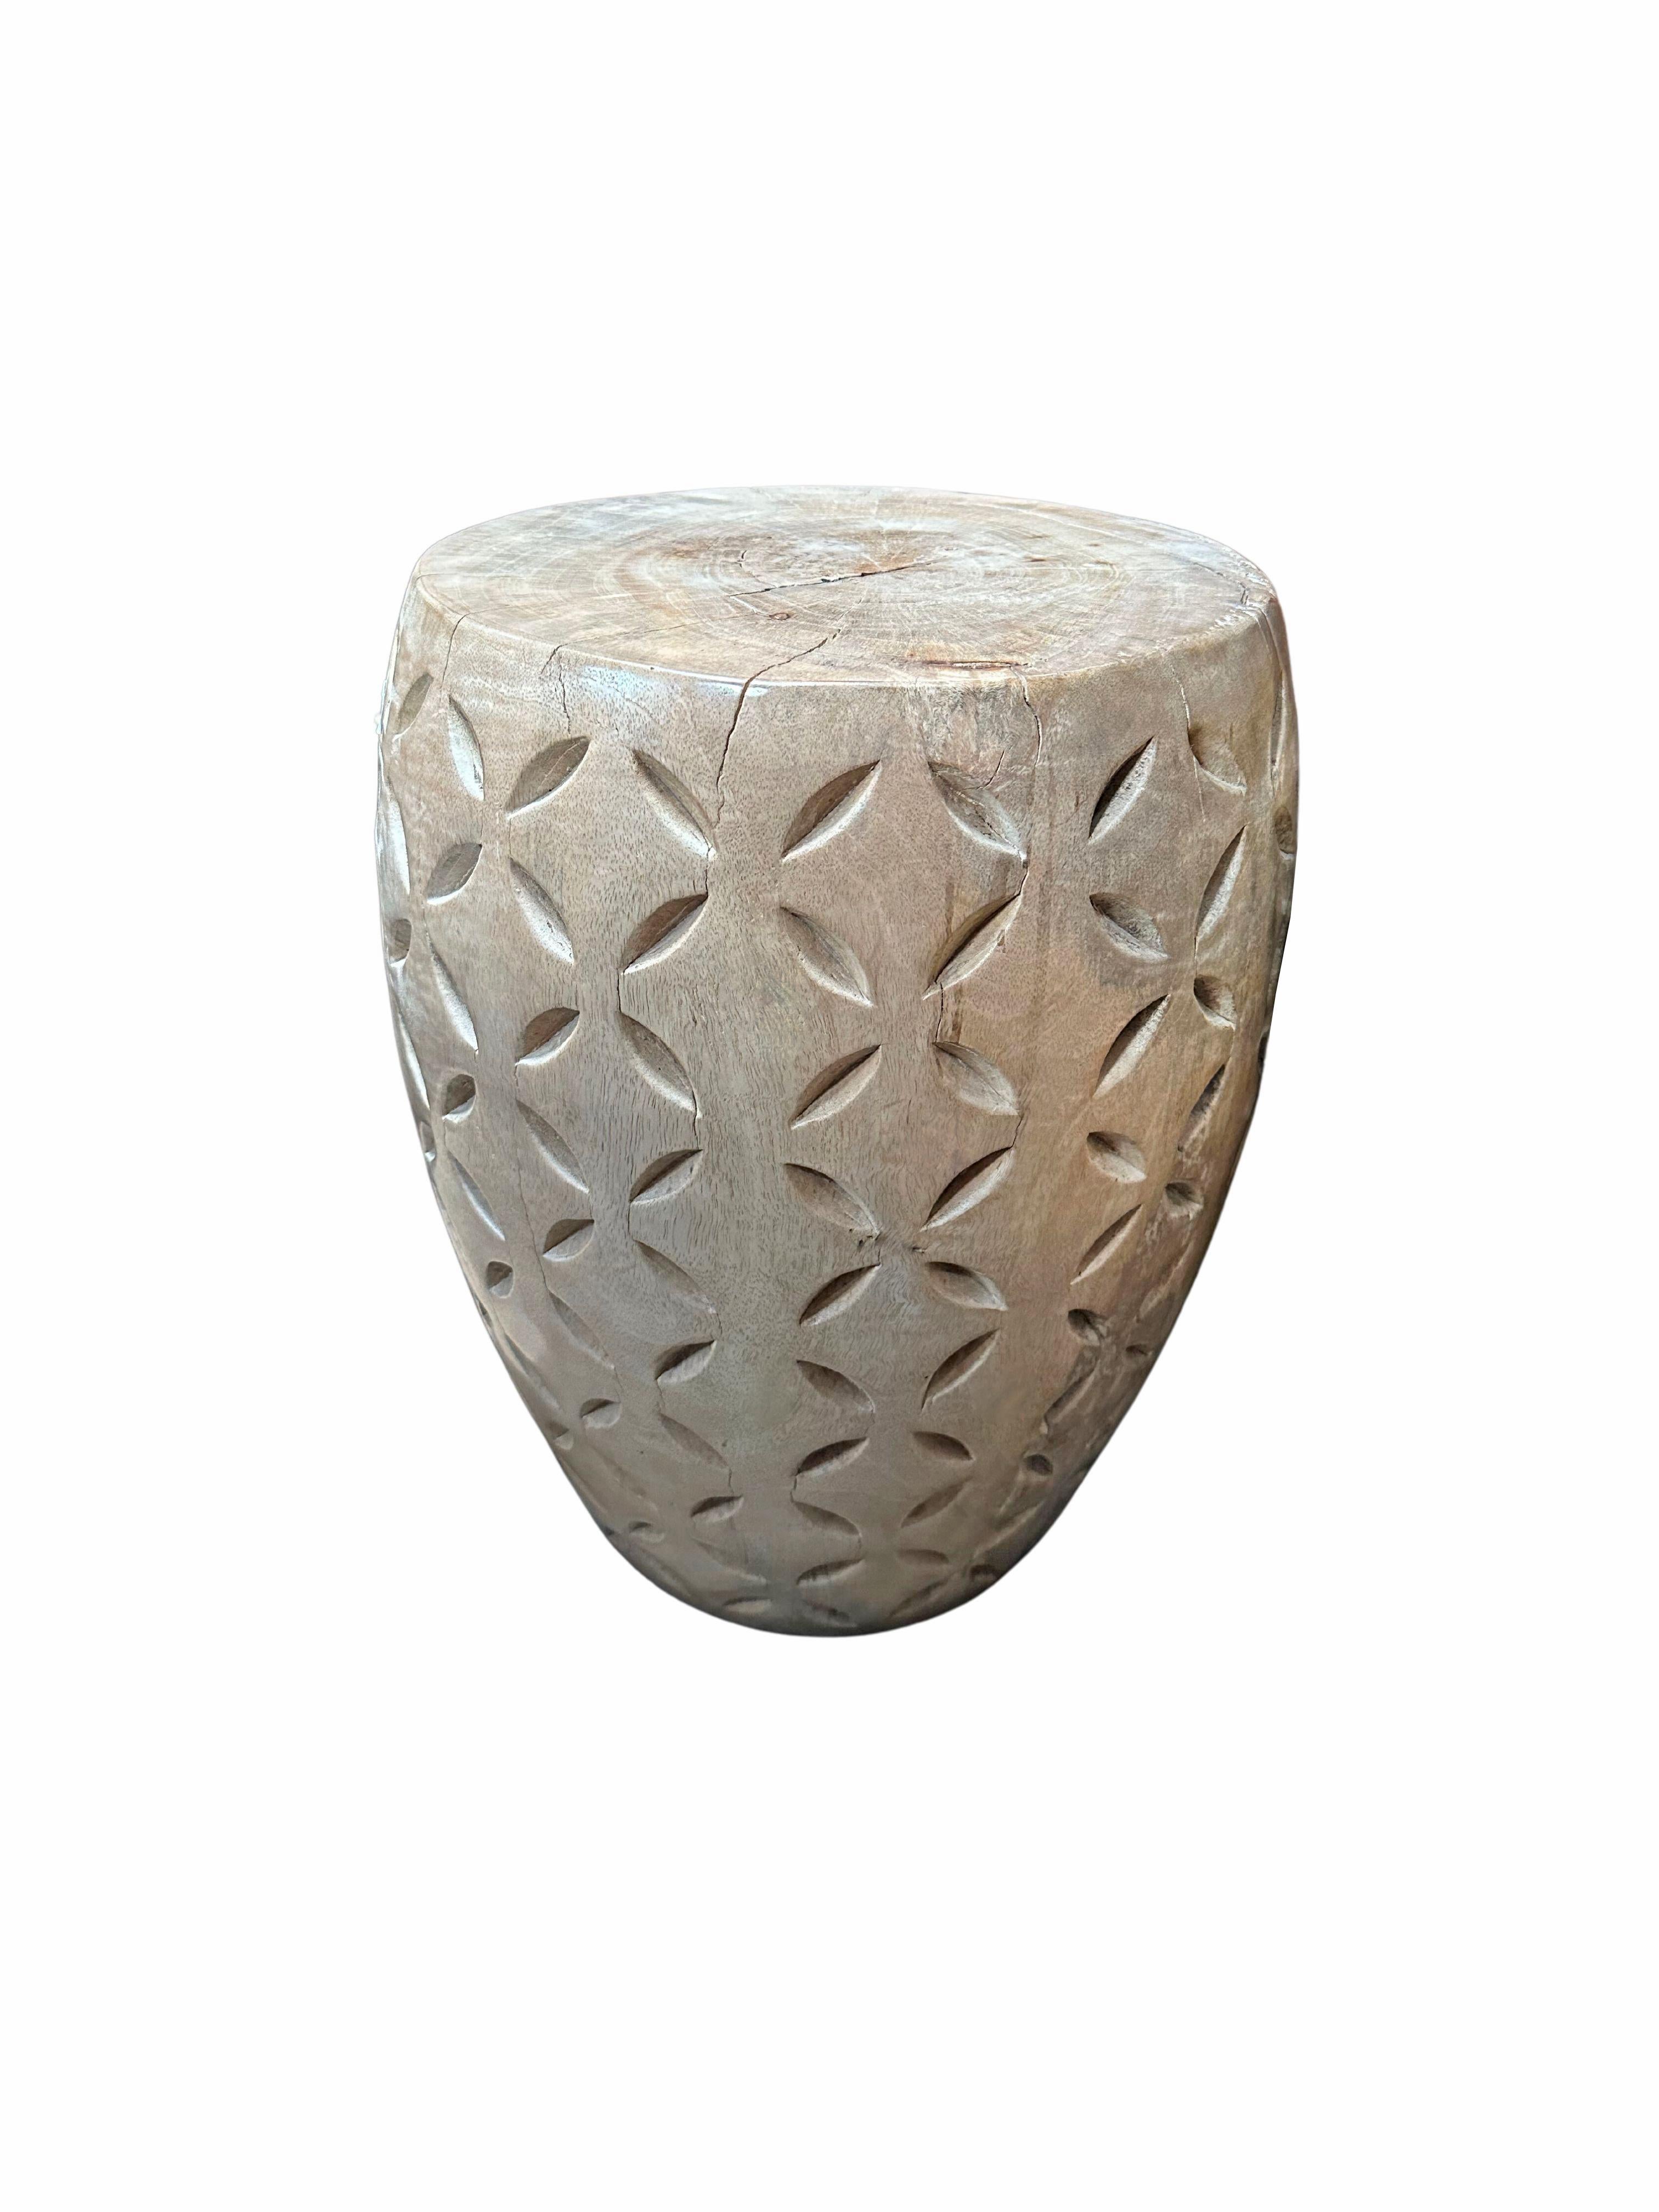 A wonderfully sculptural side table crafted from solid mango wood. It features a natural finish where the exterior was sanded and smoothed. The table features a wonderful mix of wood textures and shades. Unique to this table is the 